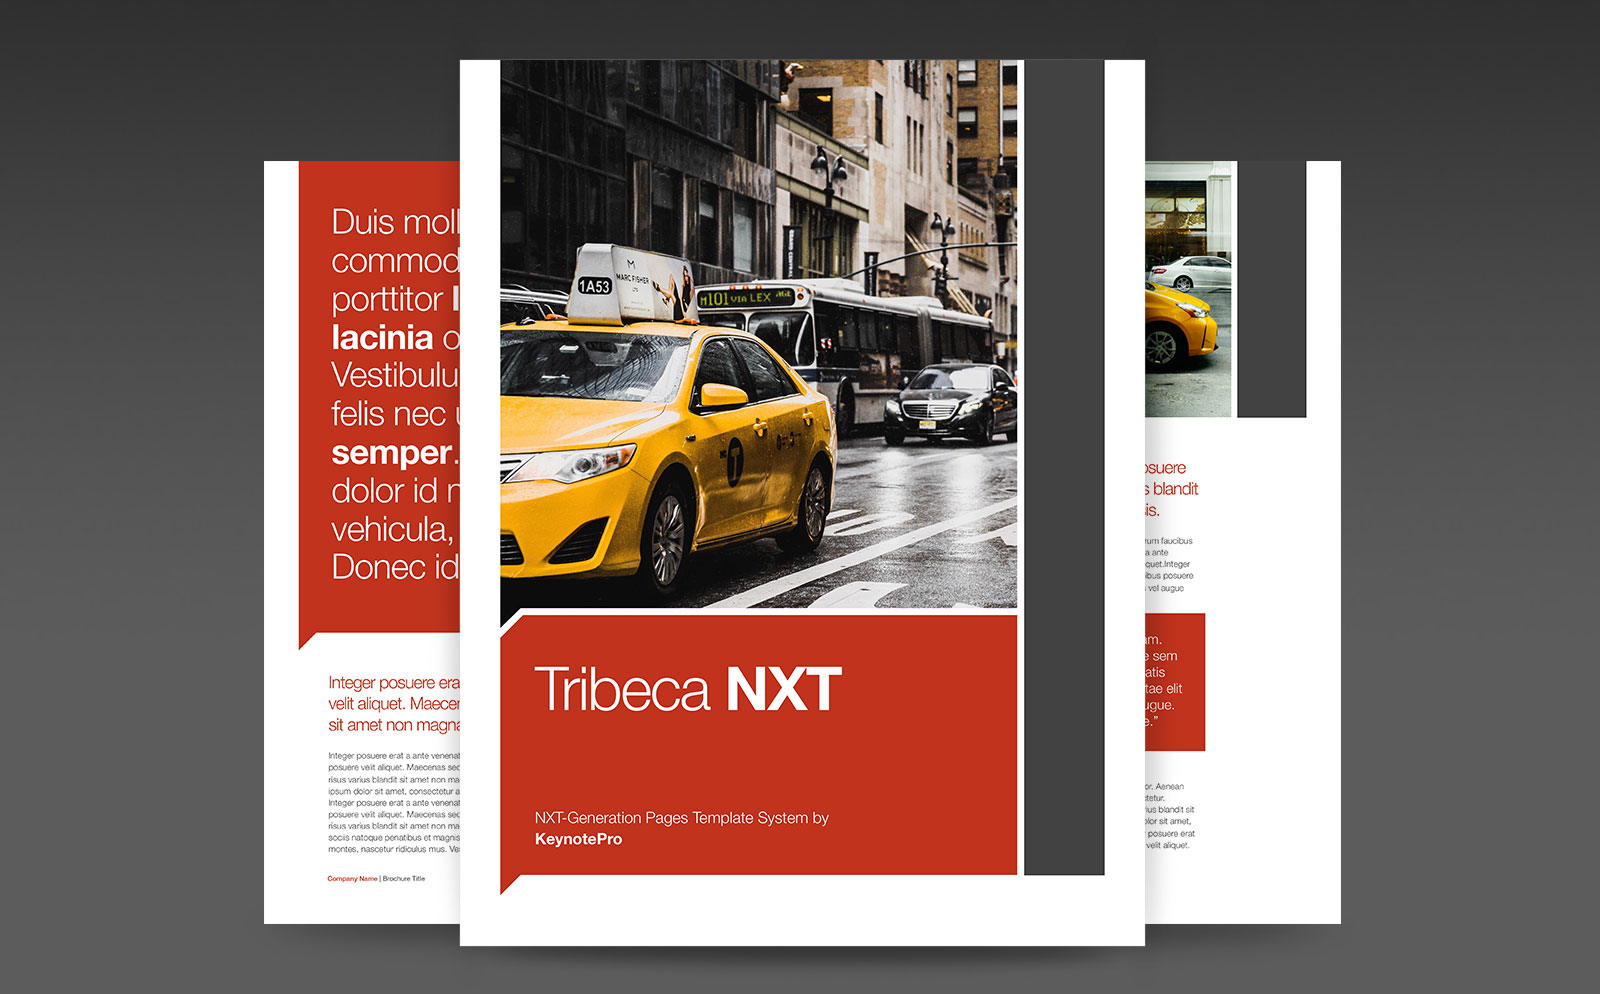 Tribeca NXT Template System for Pages